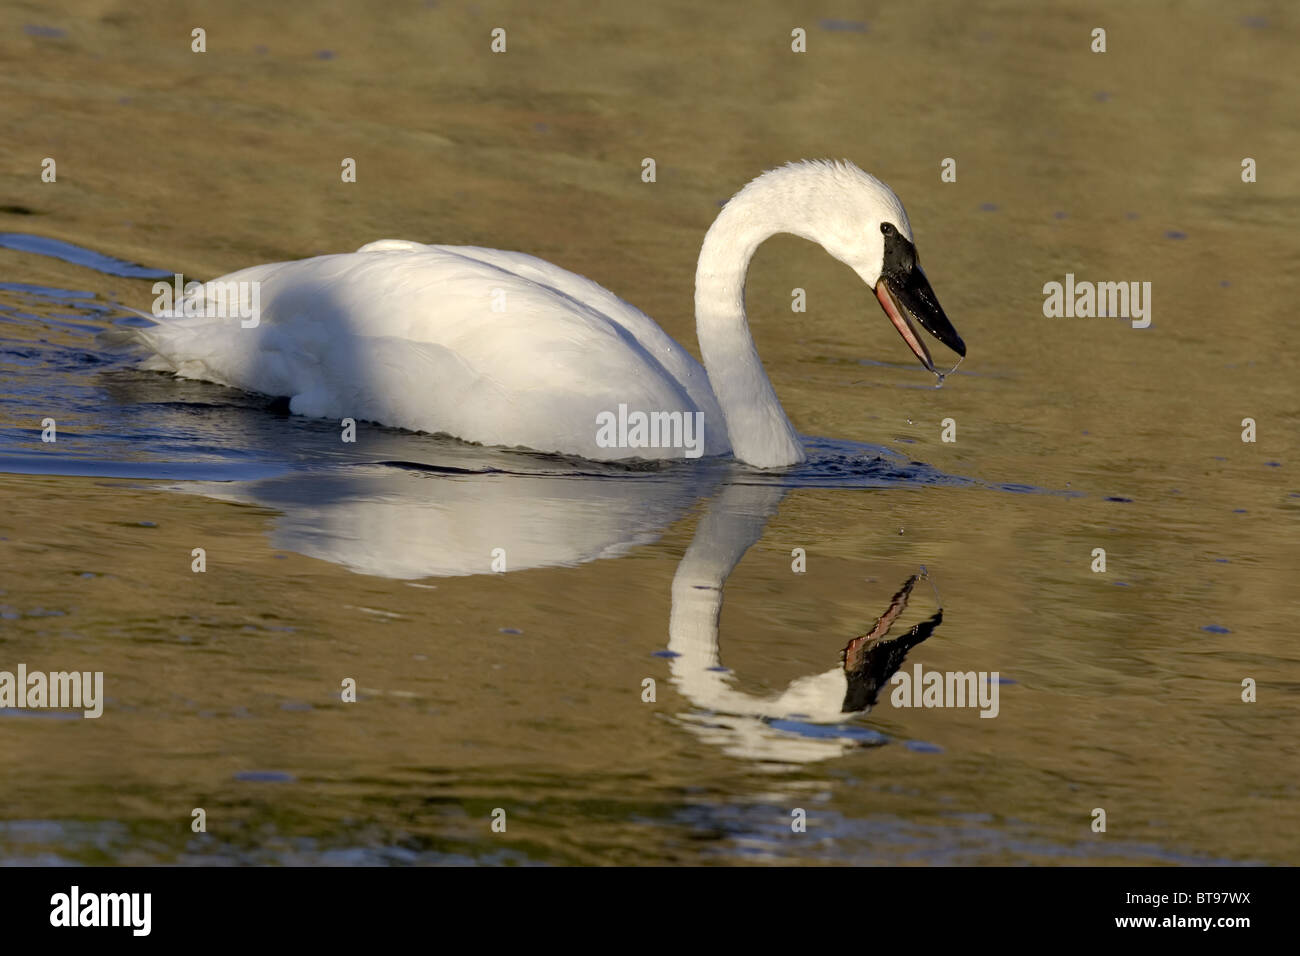 Trumpeter swan with reflection in water Stock Photo